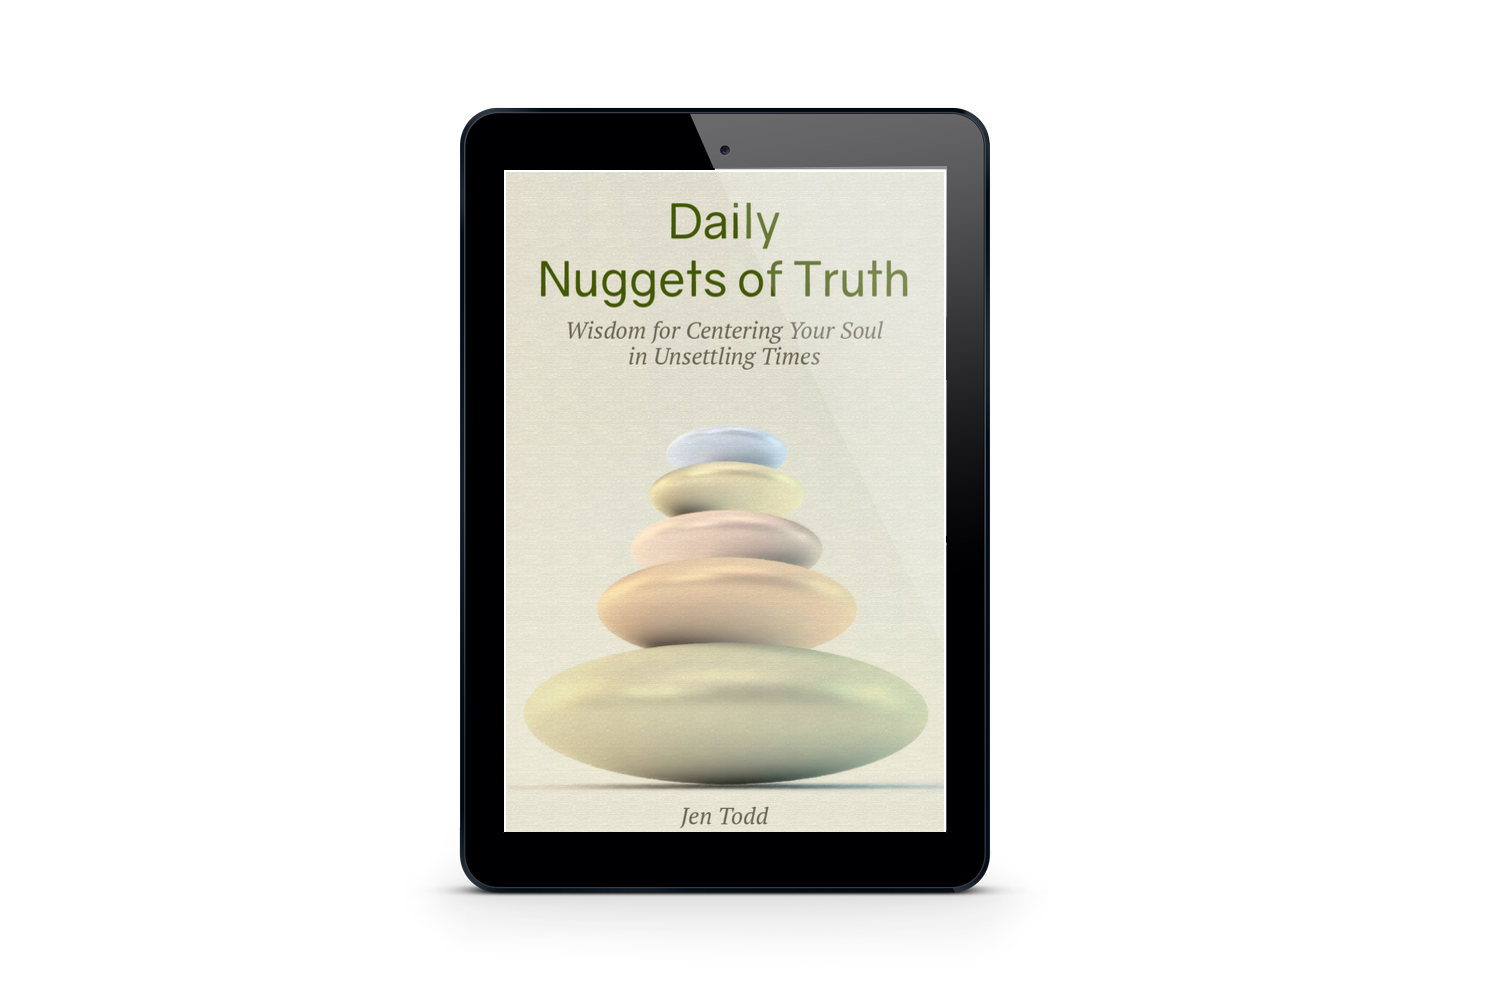 Daily Nuggets of truth - book preview on tablet